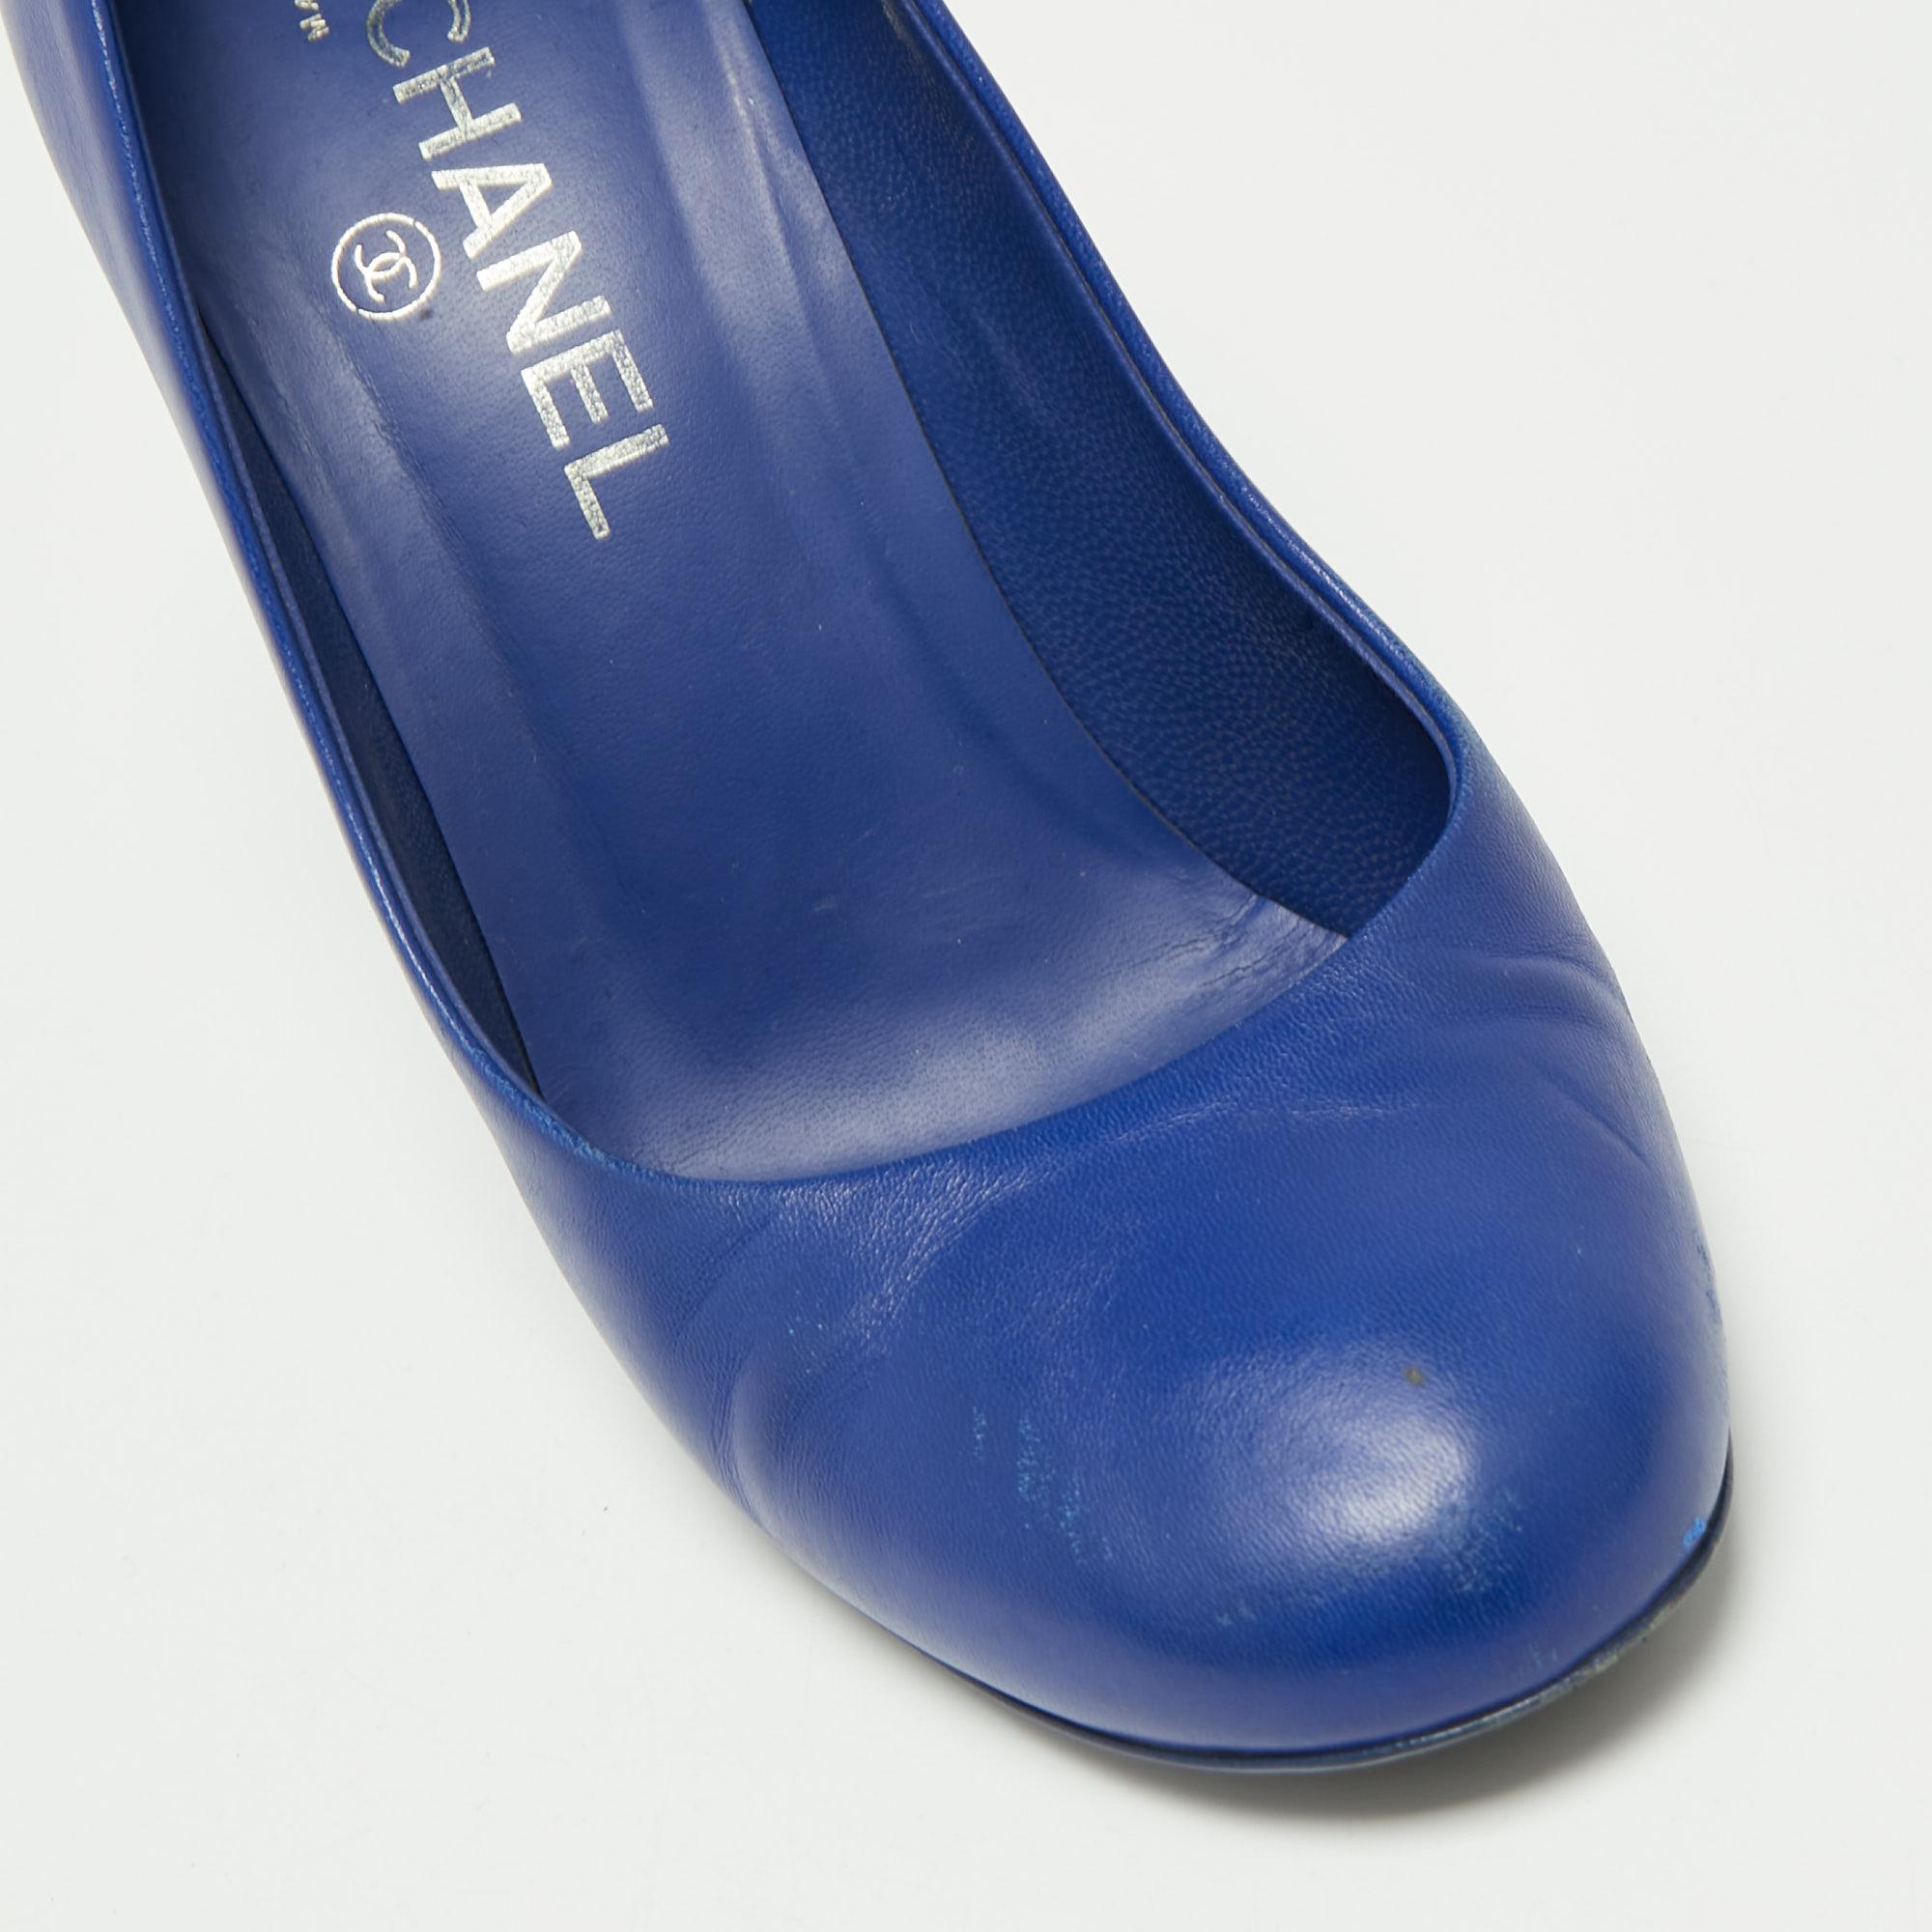 Chanel Blue Leather Round Toe Block Heel Pumps Size 38 2